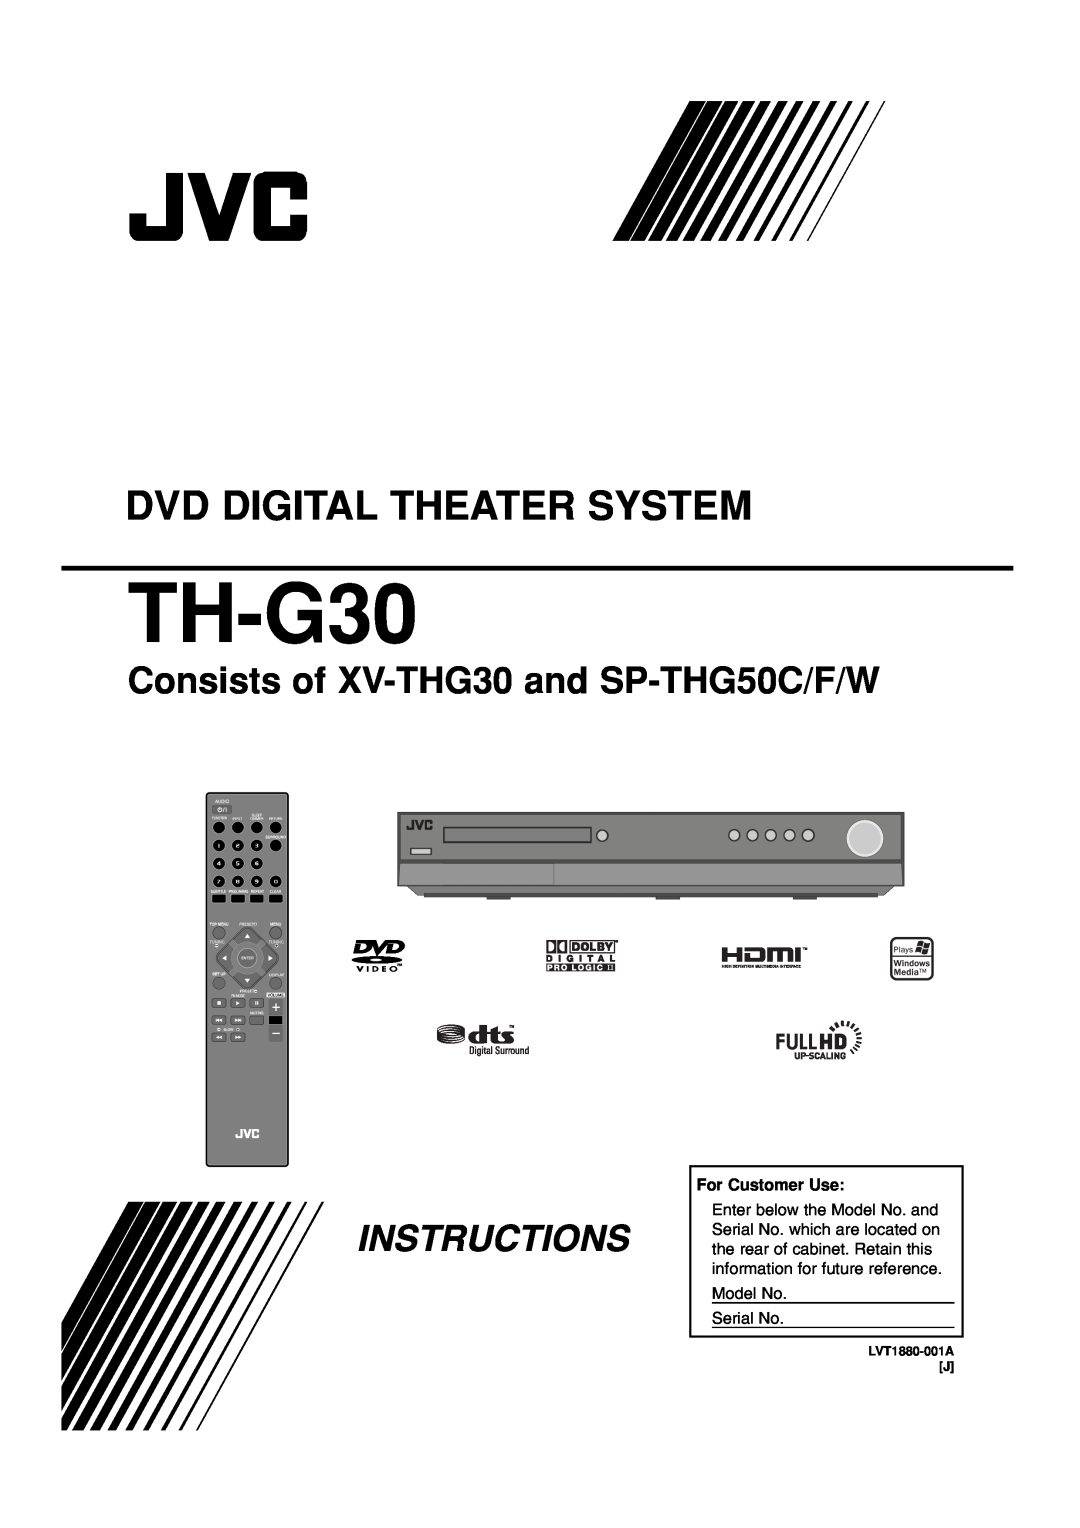 JVC TH-G40 TH-G30, Consists of XV-THG30 and SP-THG50C/F/W, Dvd Digital Theater System, Instructions, For Customer Use 